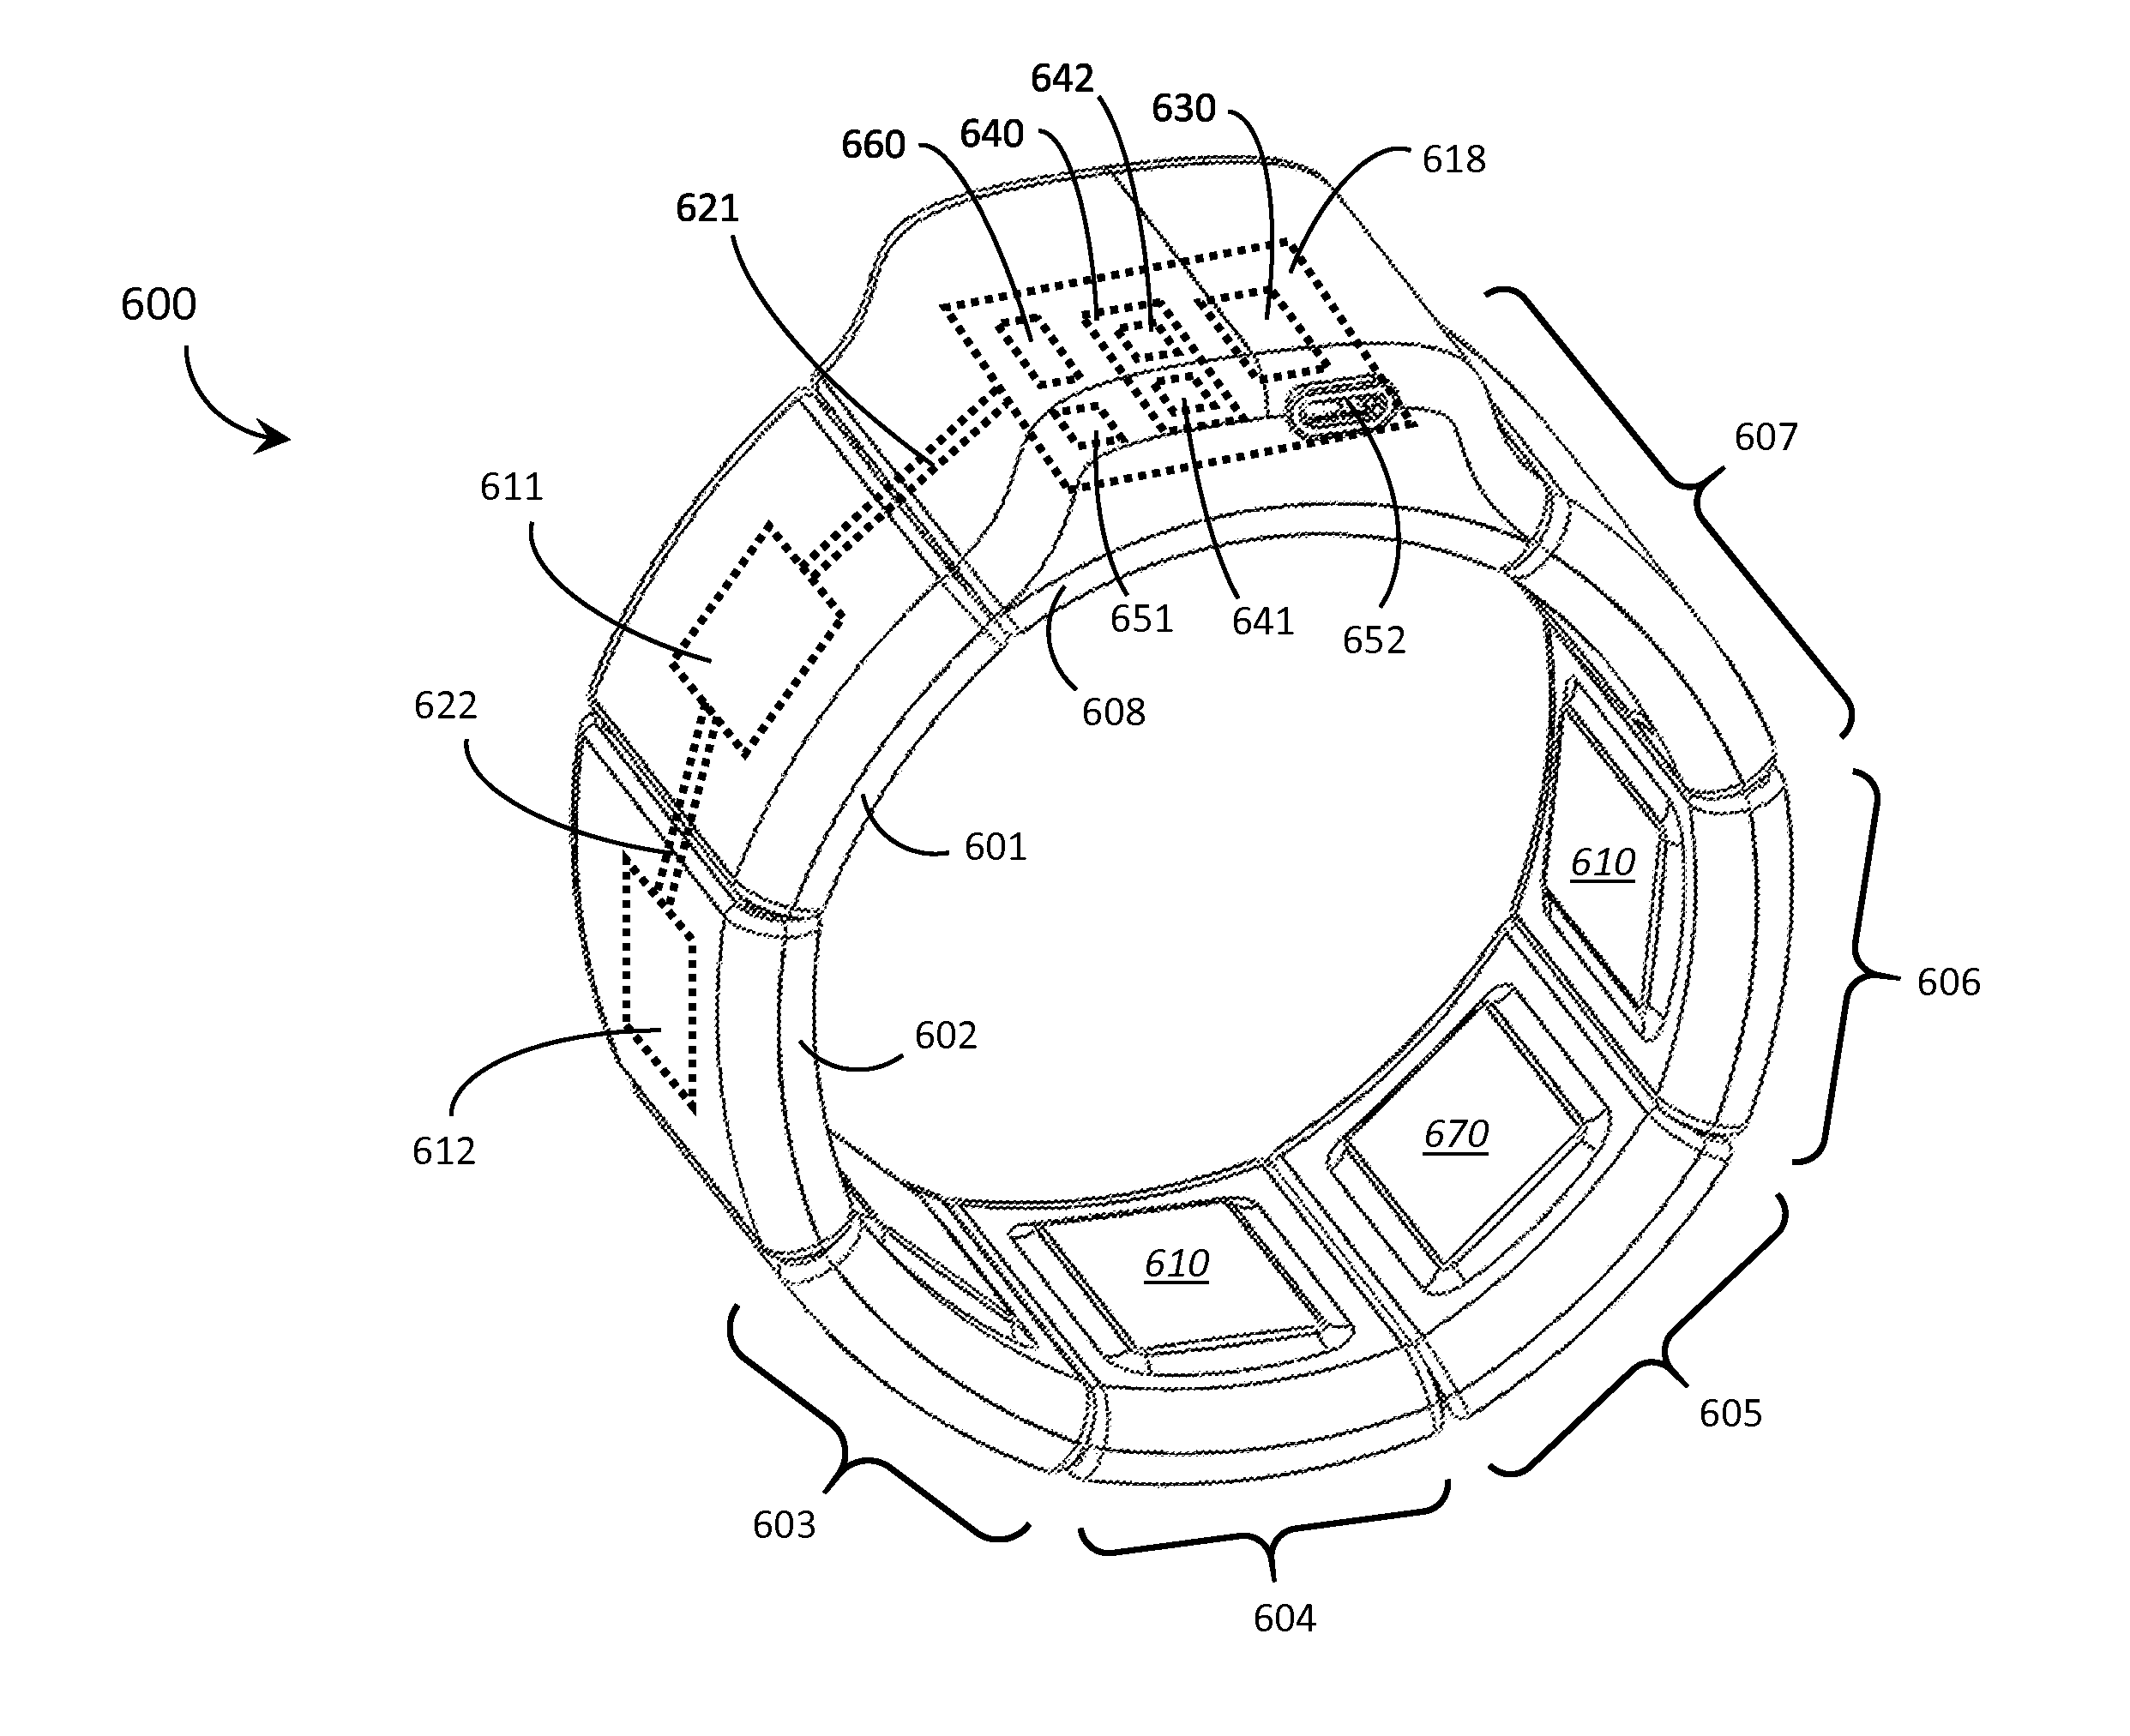 Systems, articles and methods for wearable electronic devices employing contact sensors